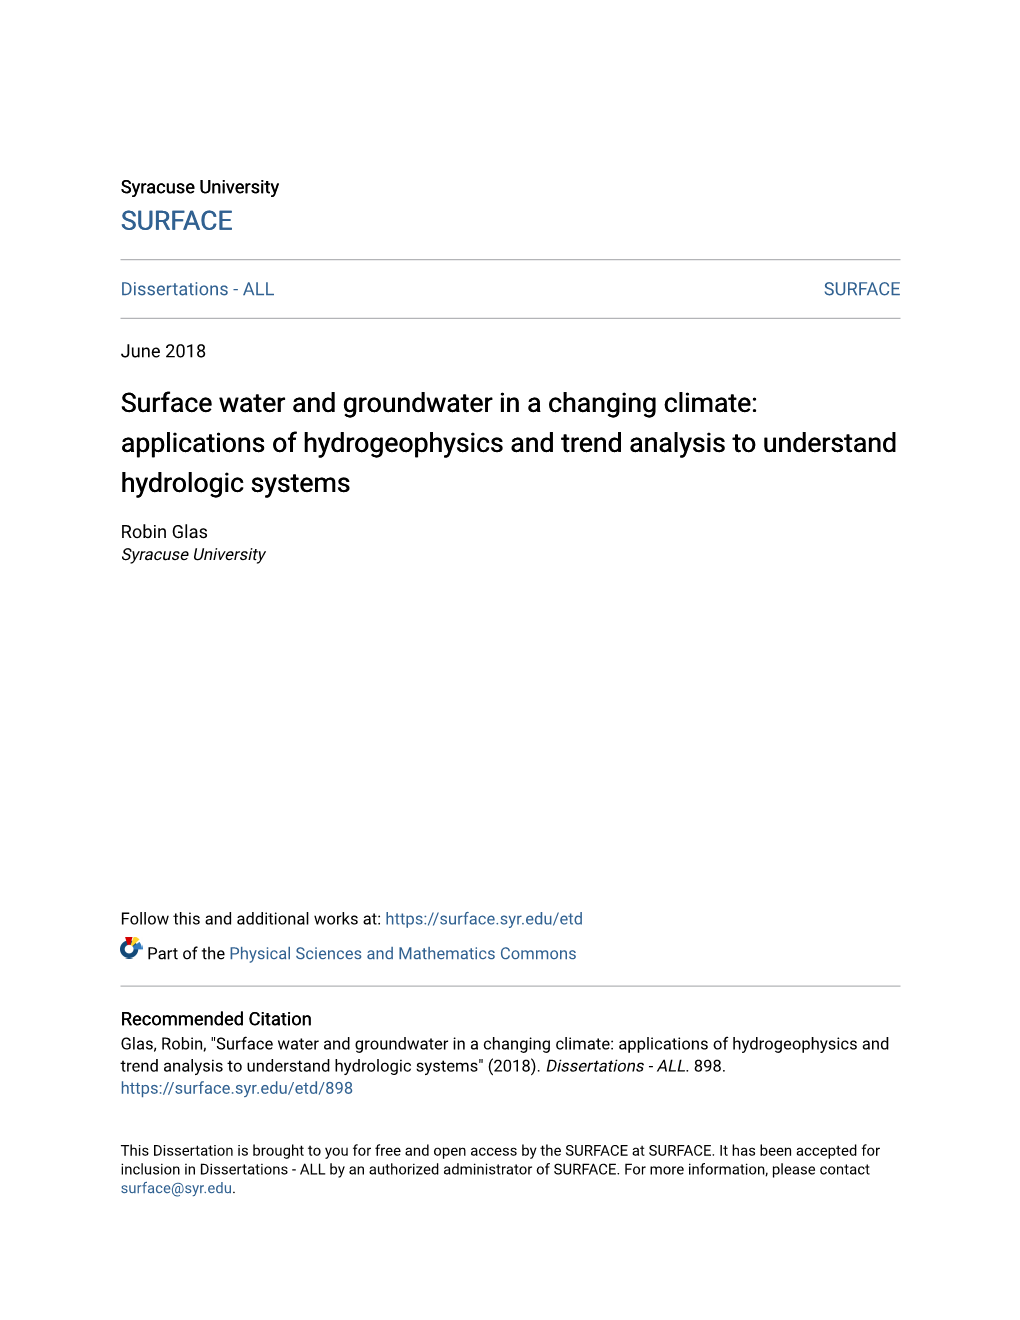 Surface Water and Groundwater in a Changing Climate: Applications of Hydrogeophysics and Trend Analysis to Understand Hydrologic Systems